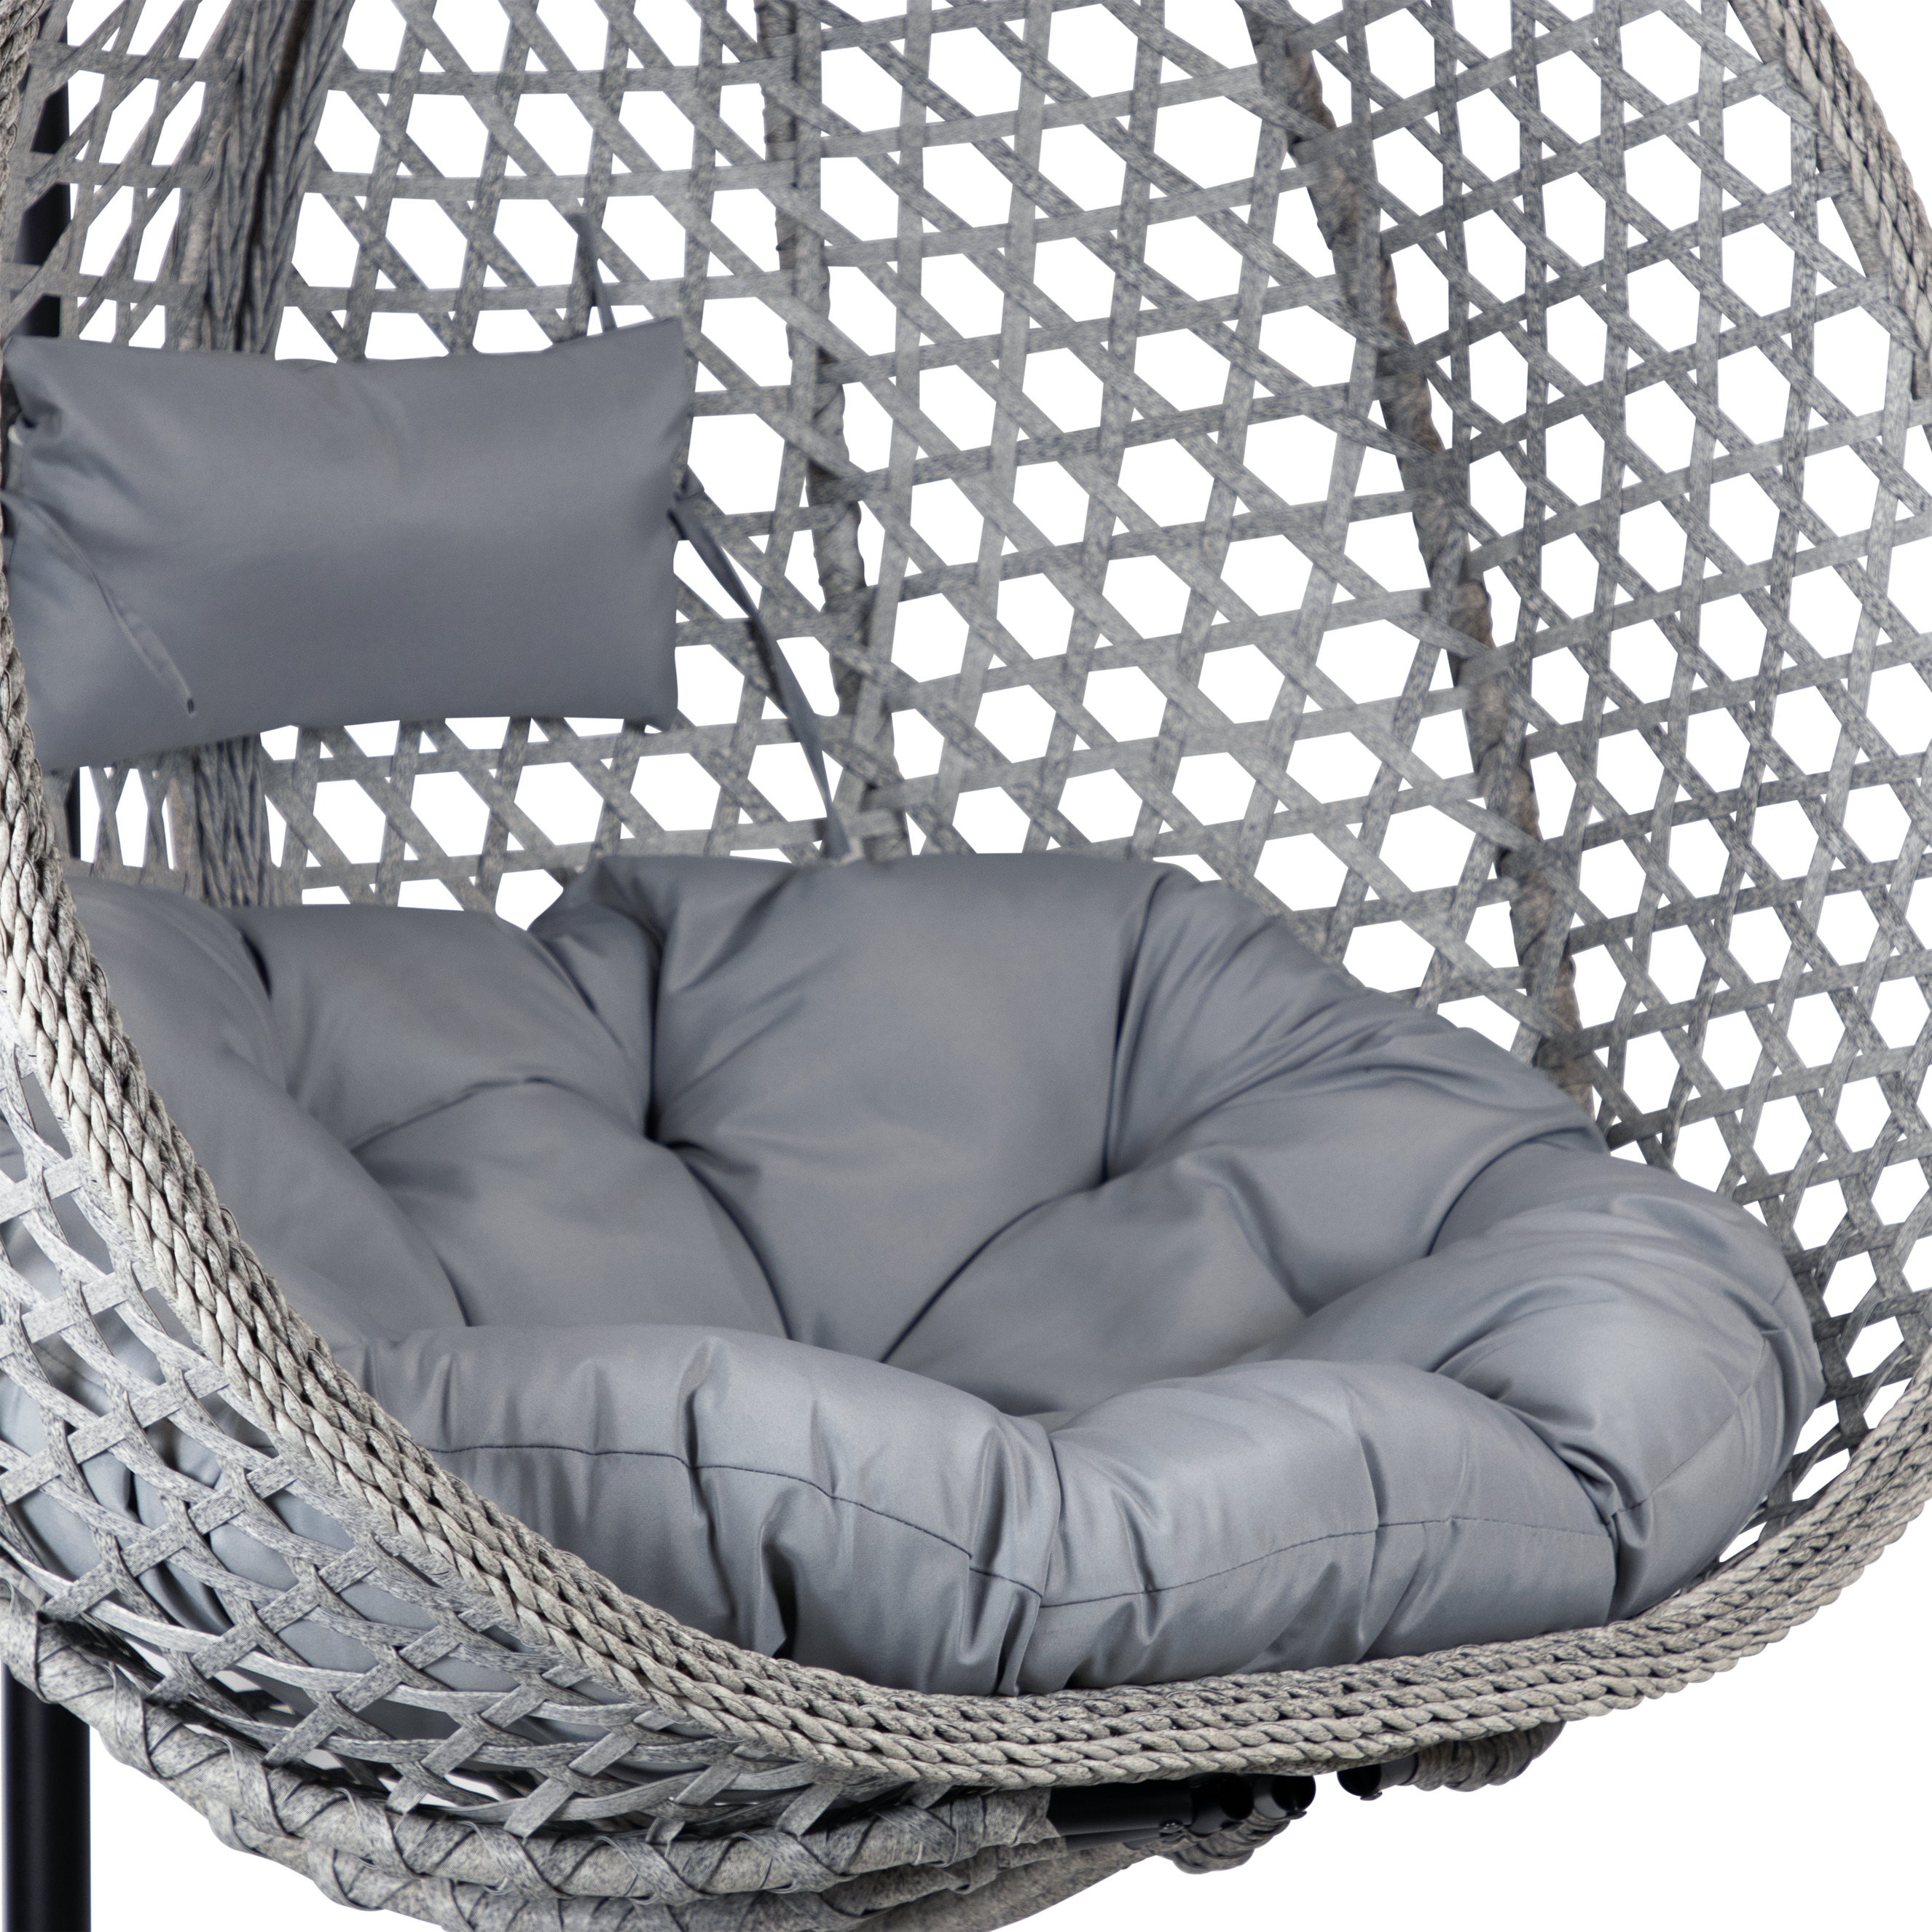 The Leaders in Premium Outdoor Have Done It Again with the New Outdoor Pod Chair Range